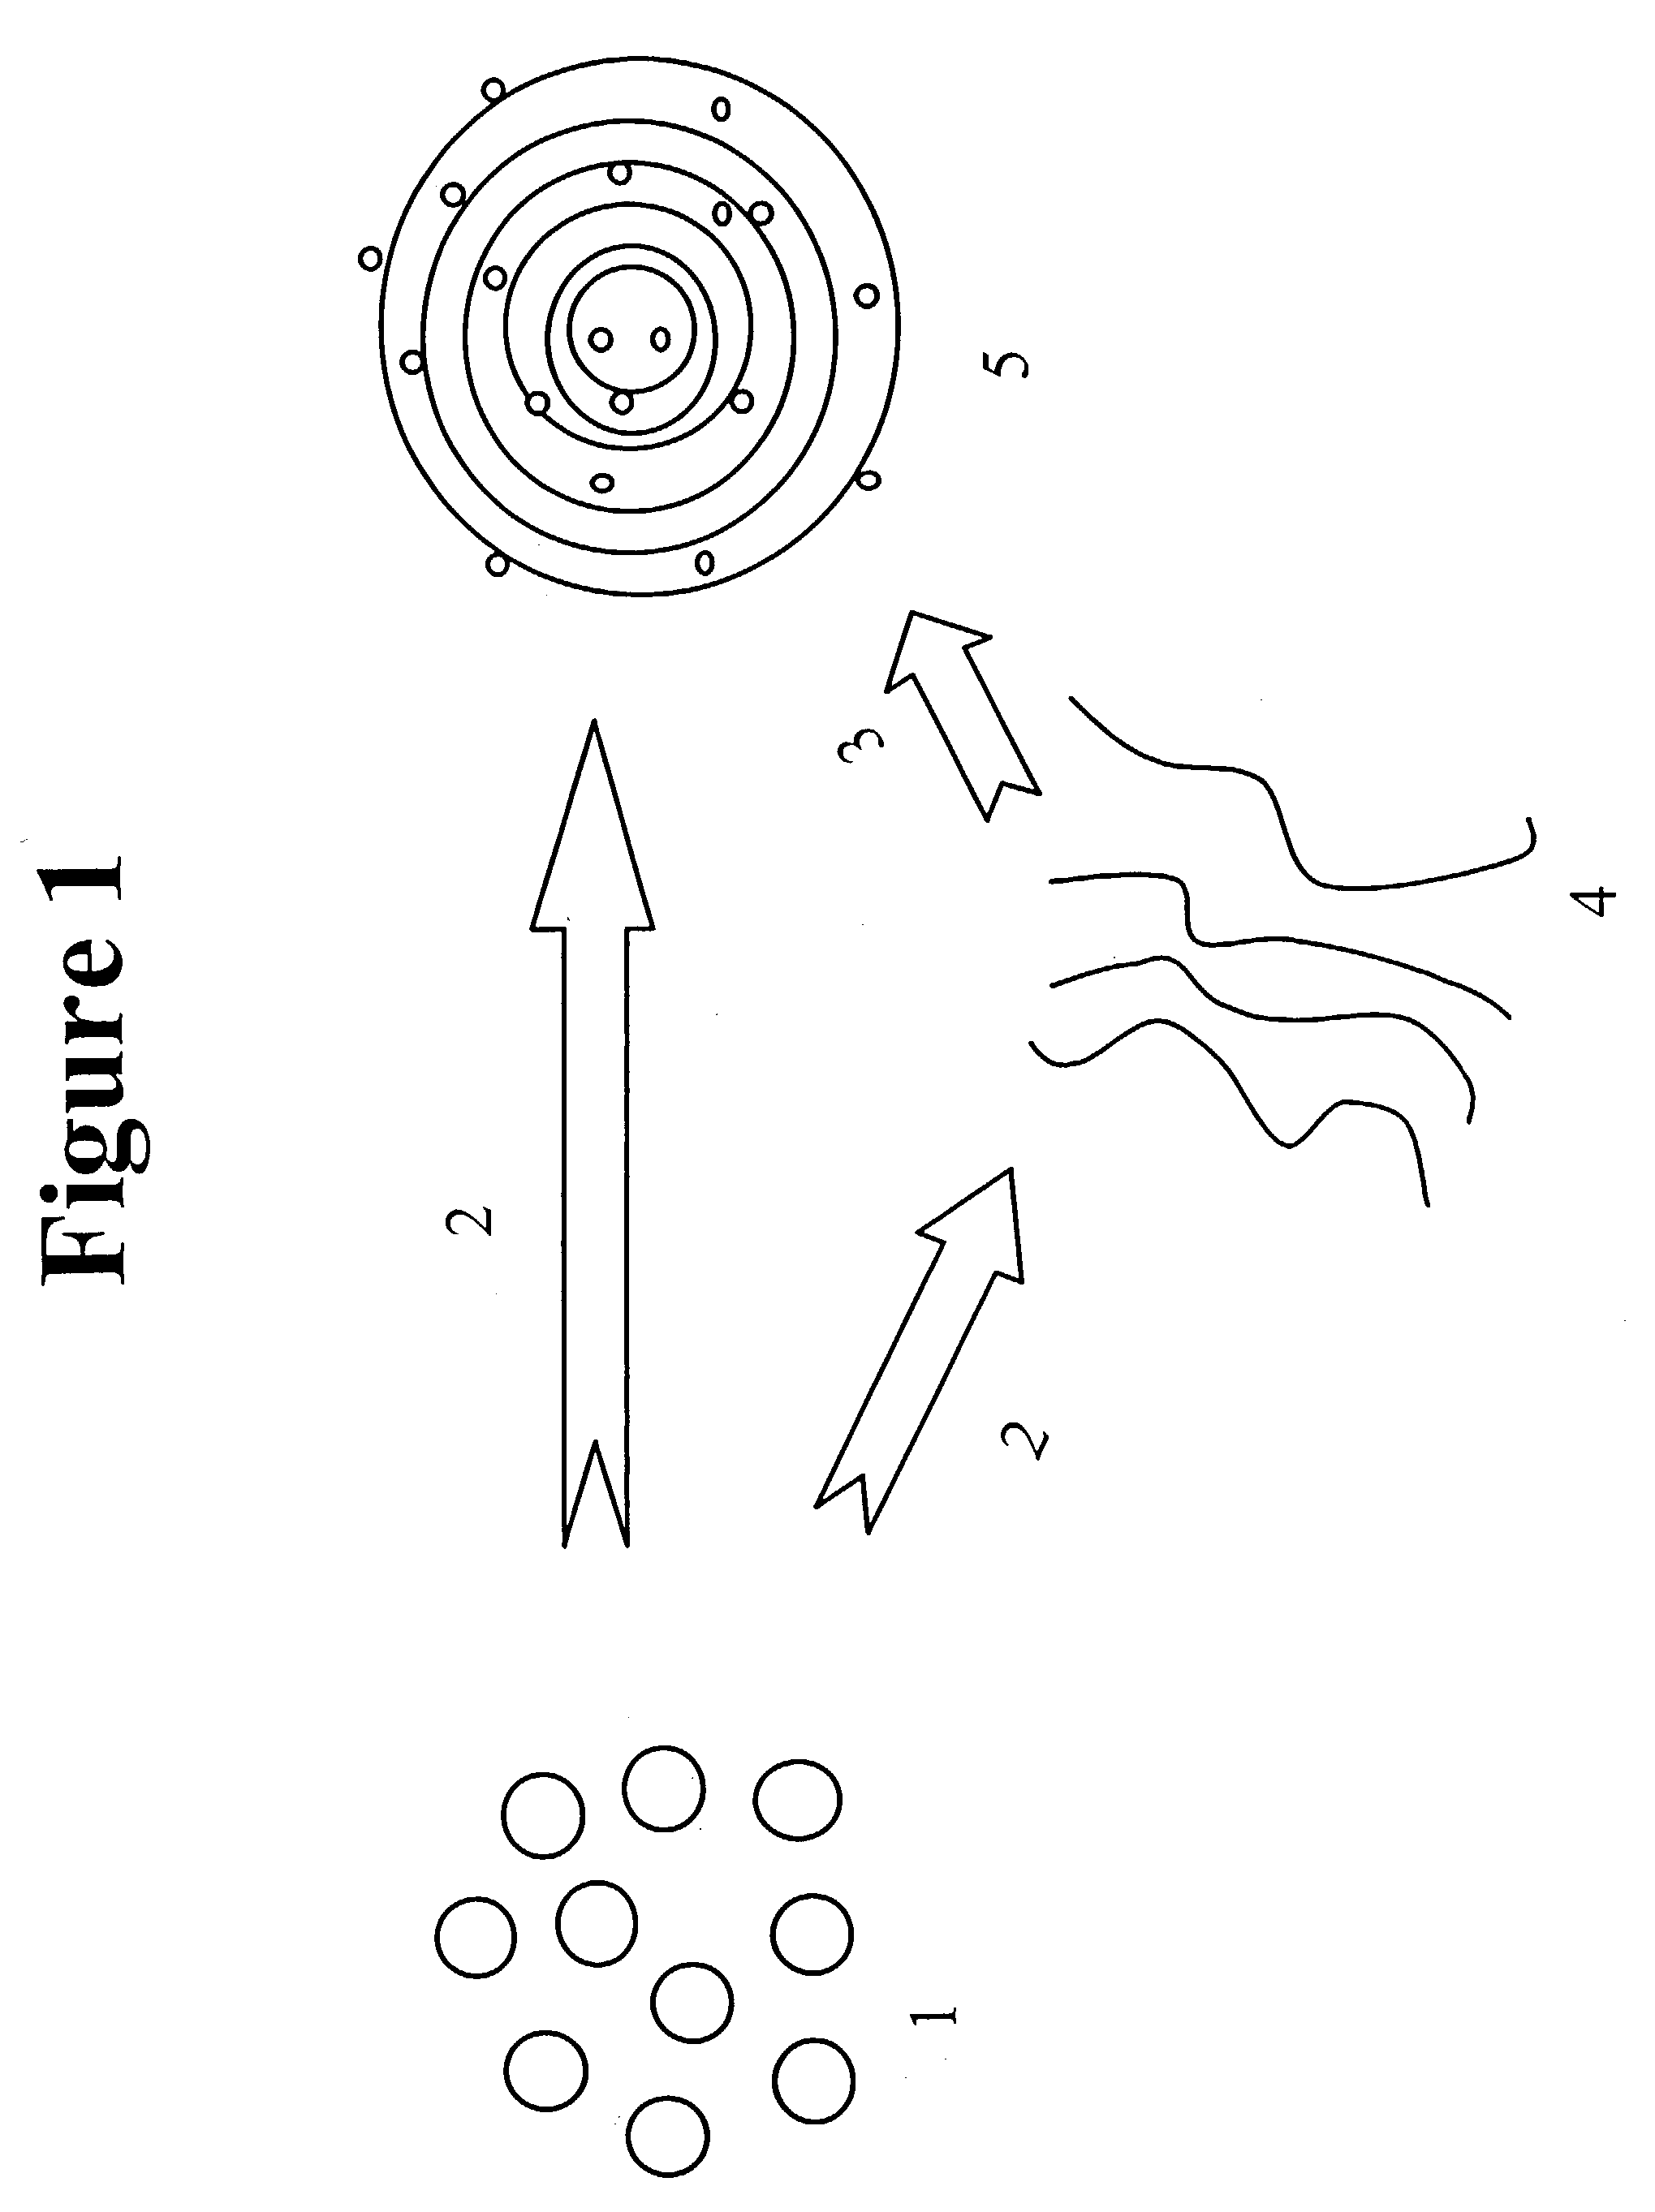 Methods for entrapment of bioactive agent in a liposome or lipid complex